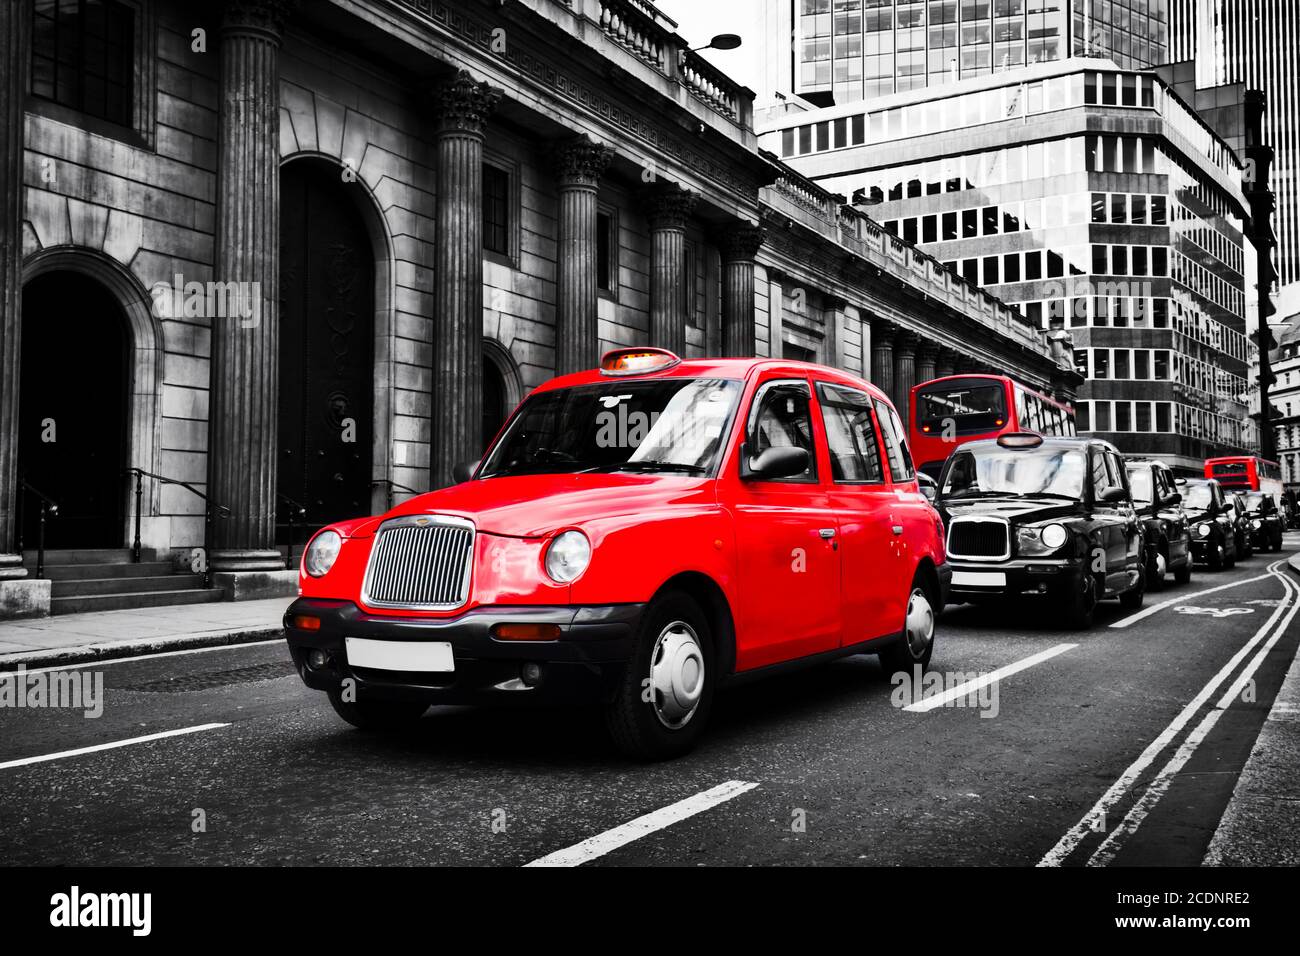 Symbol of London, the UK. Taxi cab known as hackney carriage. Stock Photo